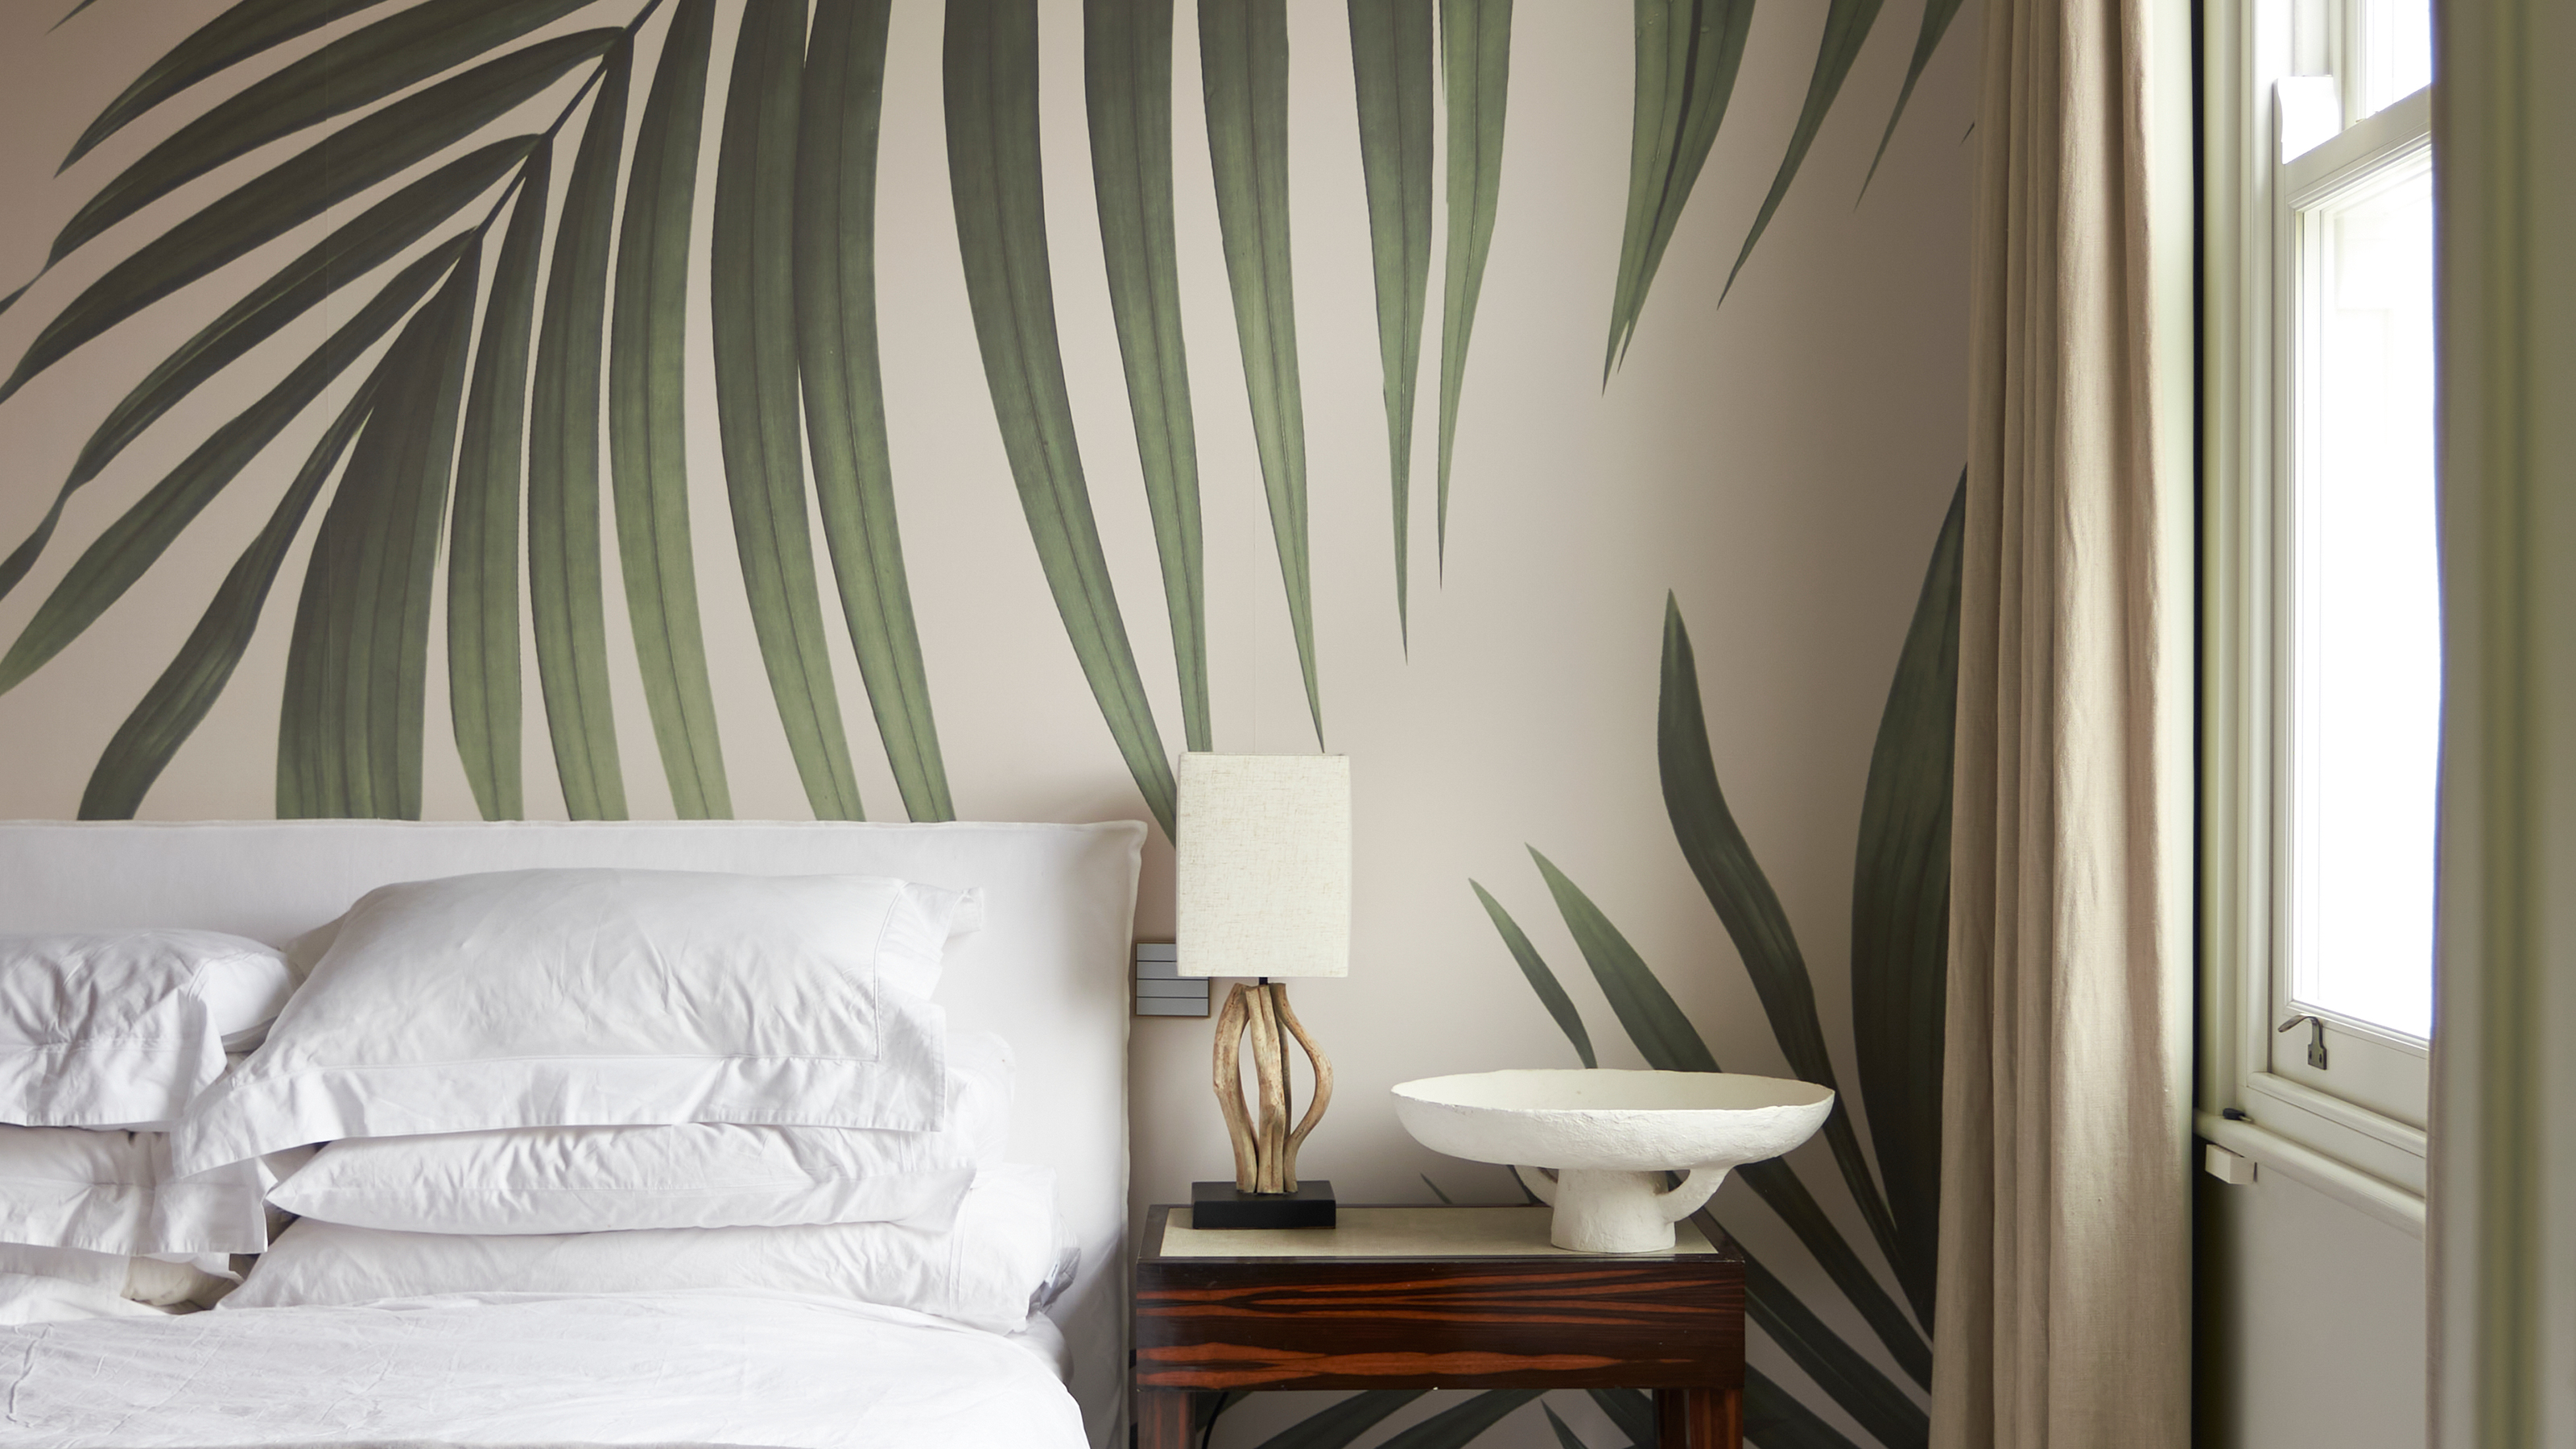 Minimalist, Yet Striking: Discover the Best Aesthetic Wallpapers